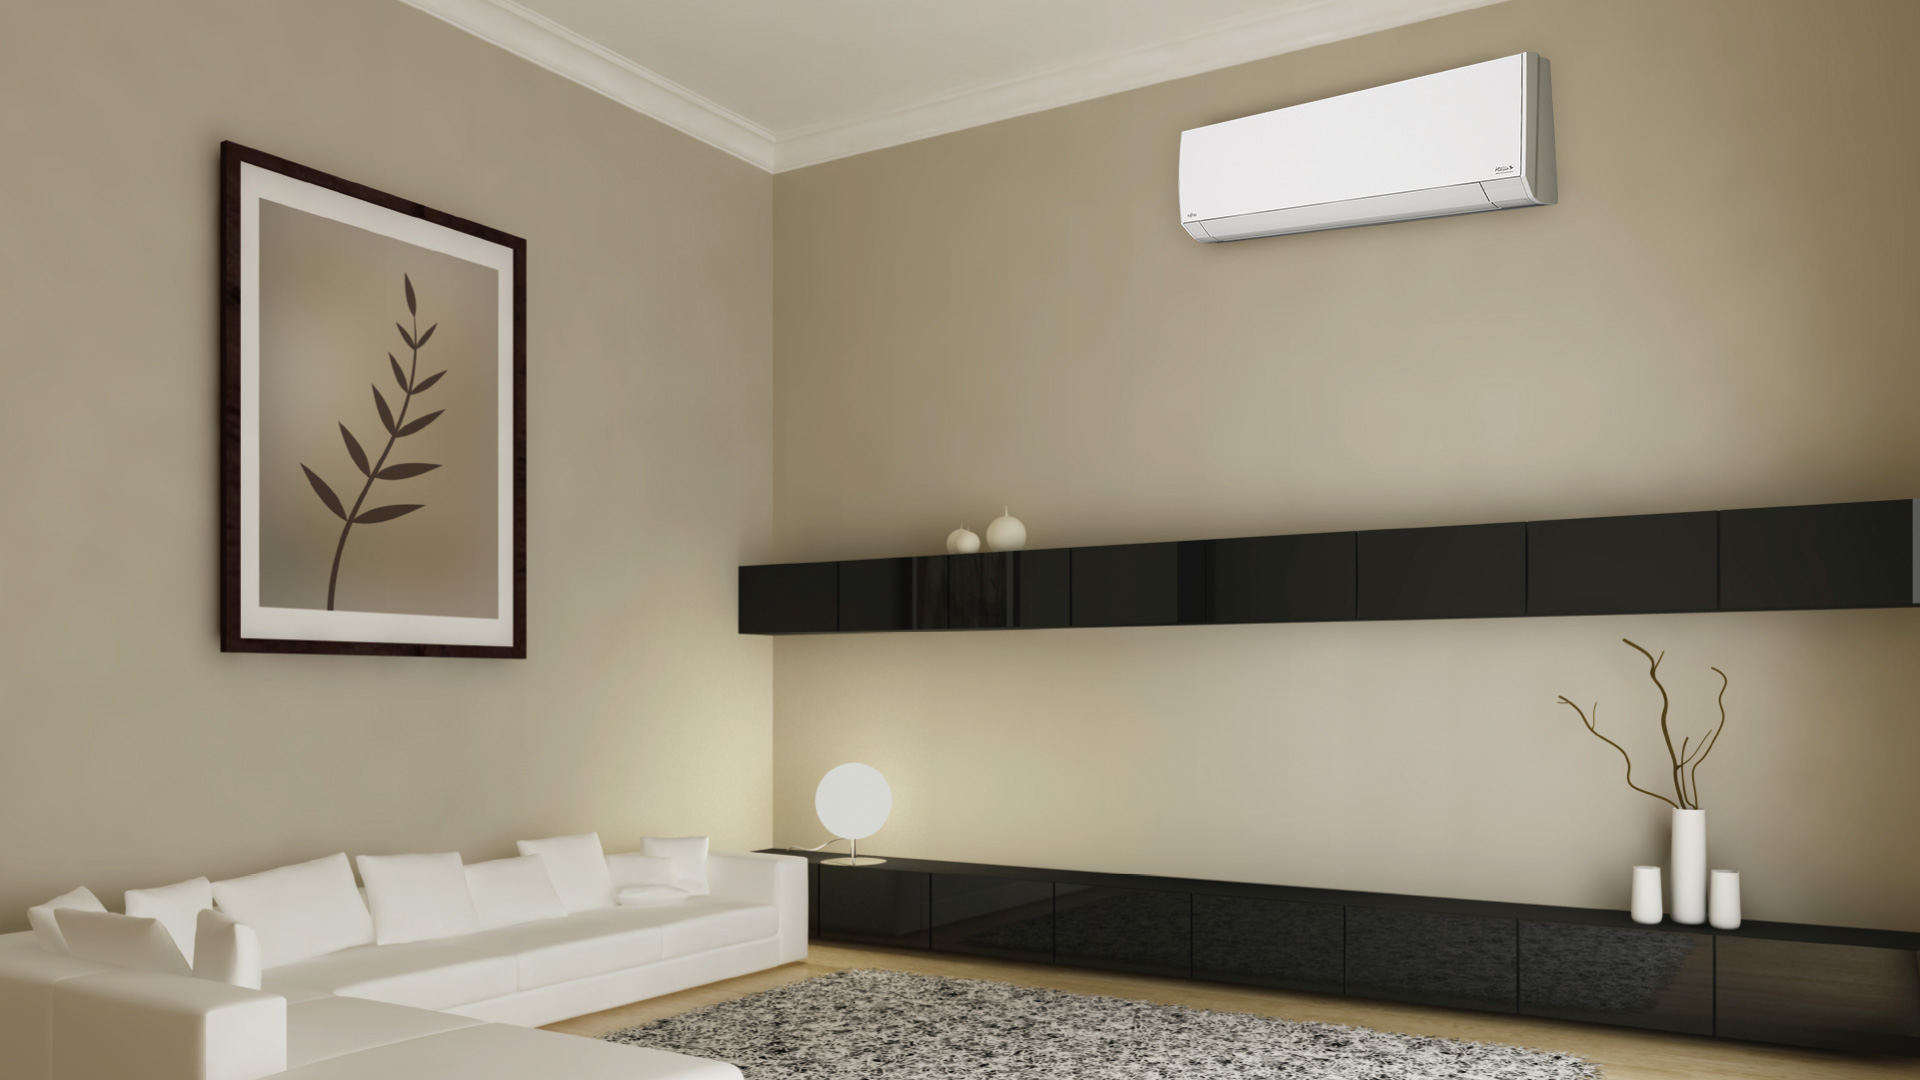 individual room heating and air conditioning units